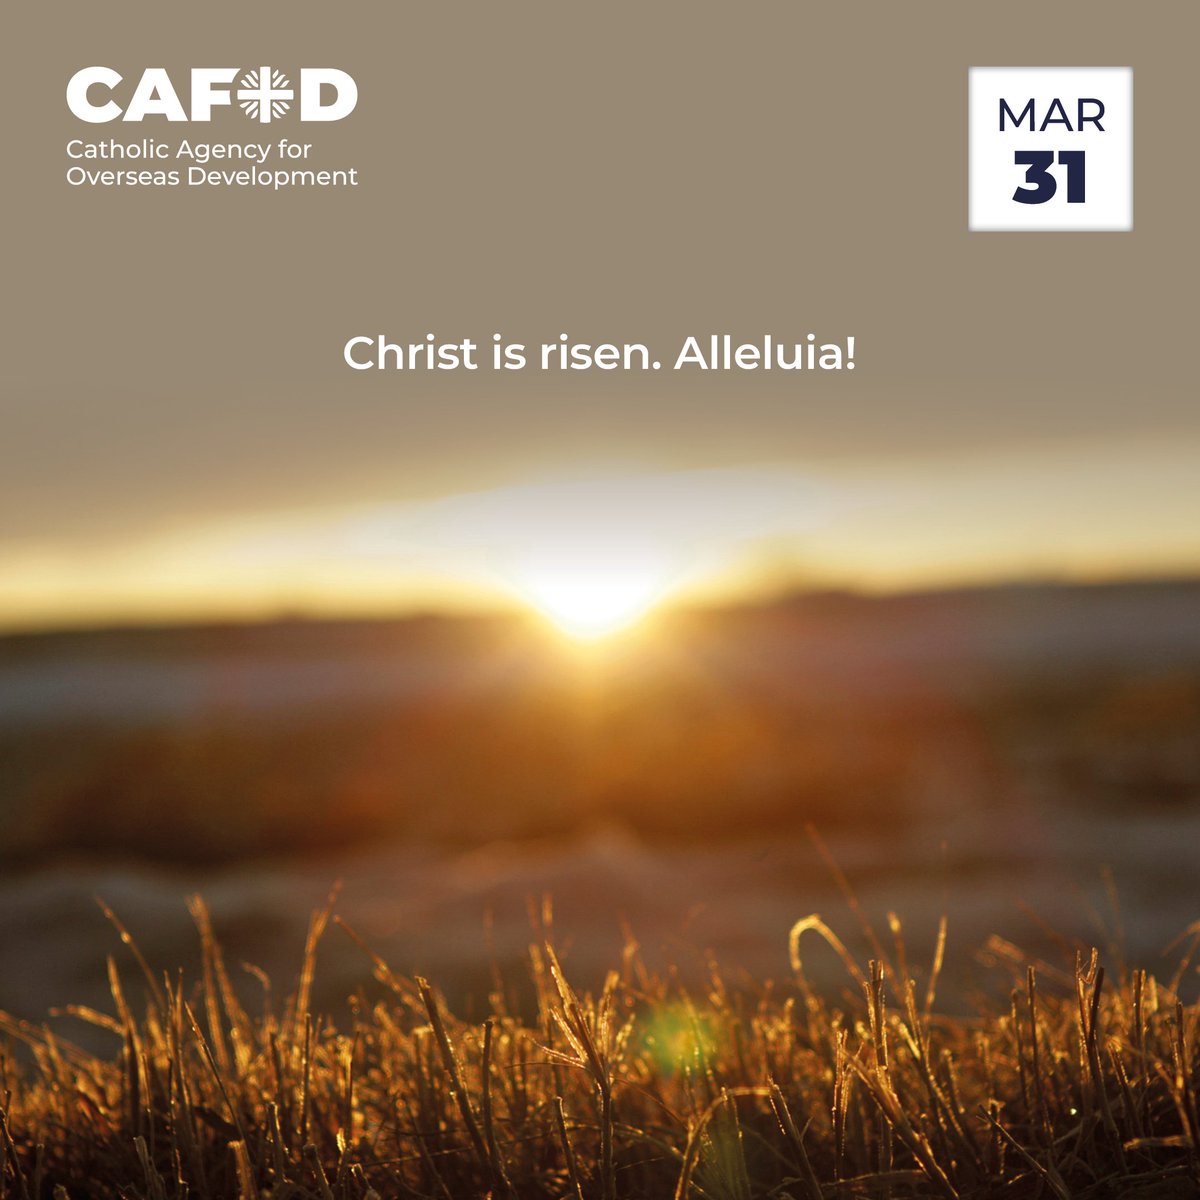 The wait is over. Christ is risen from the dead. Alleluia! We give thanks for all that the Lord has done for us. As we celebrate, let's look for the signs of hope in our world and recommit to bringing about a world where all may flourish. cafod.org.uk/pray/lent-cale…